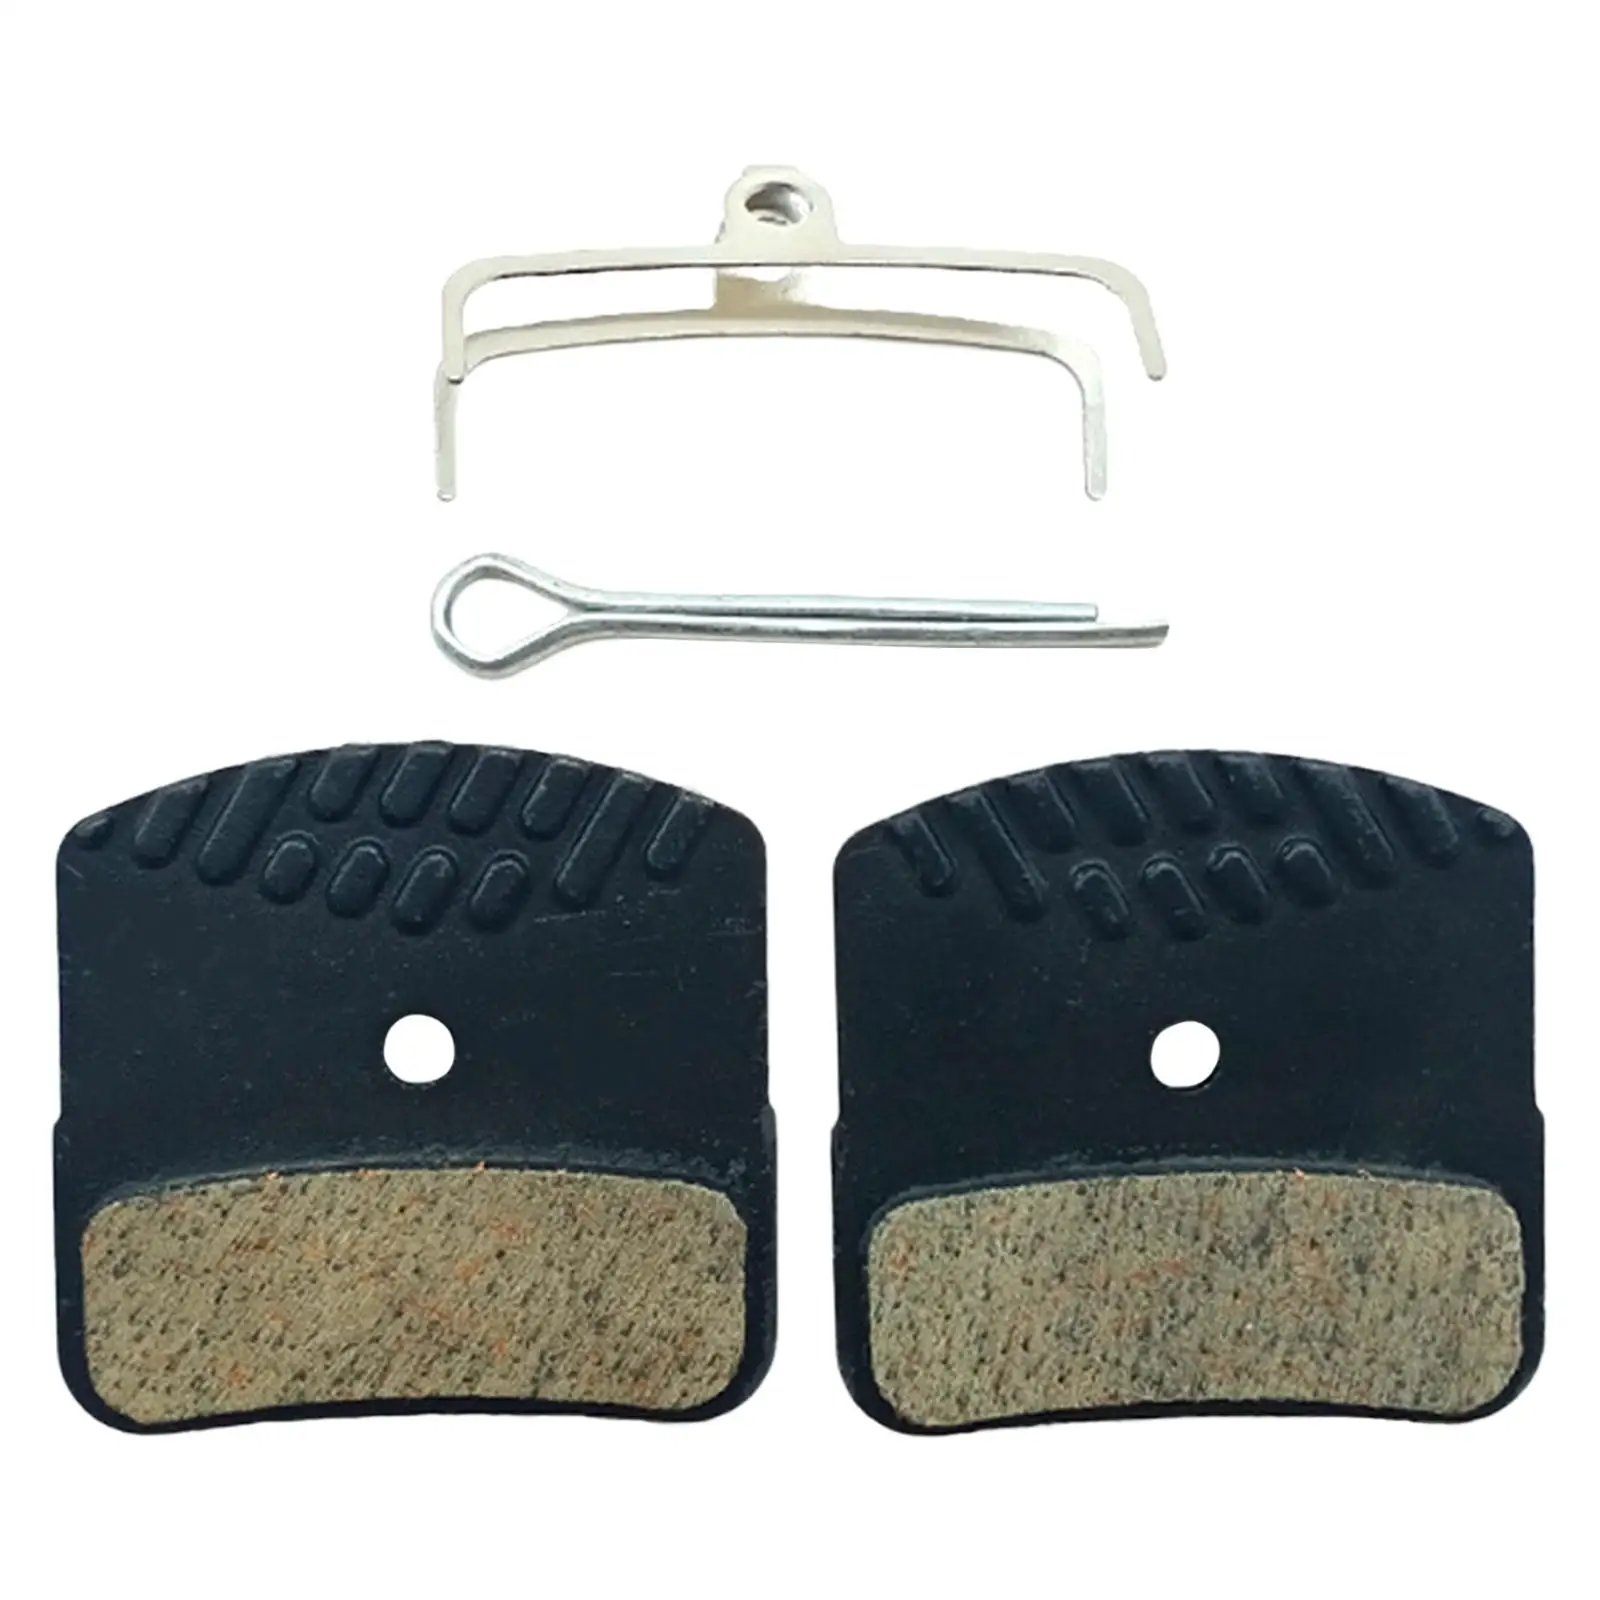 2 Pieces Bike Disc Brake Pads Bicycle Brake Pad for Q13RS Q11TS Q10Y Cycling Accessories